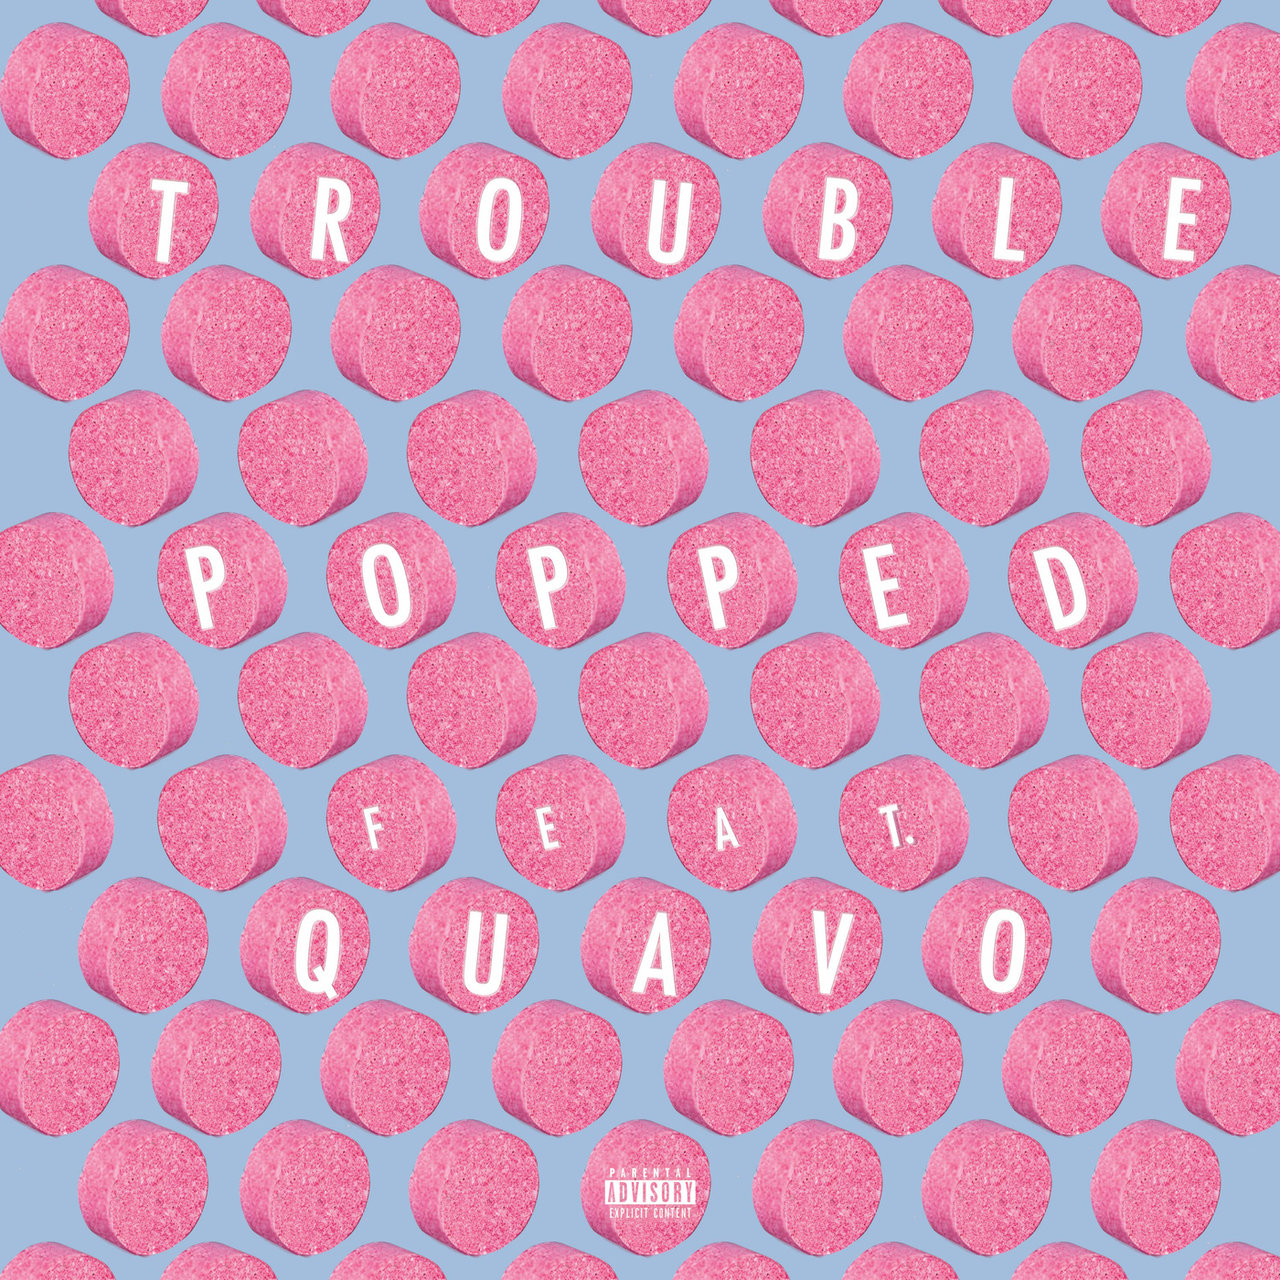 Trouble - Popped (ft. Quavo) (Cover)